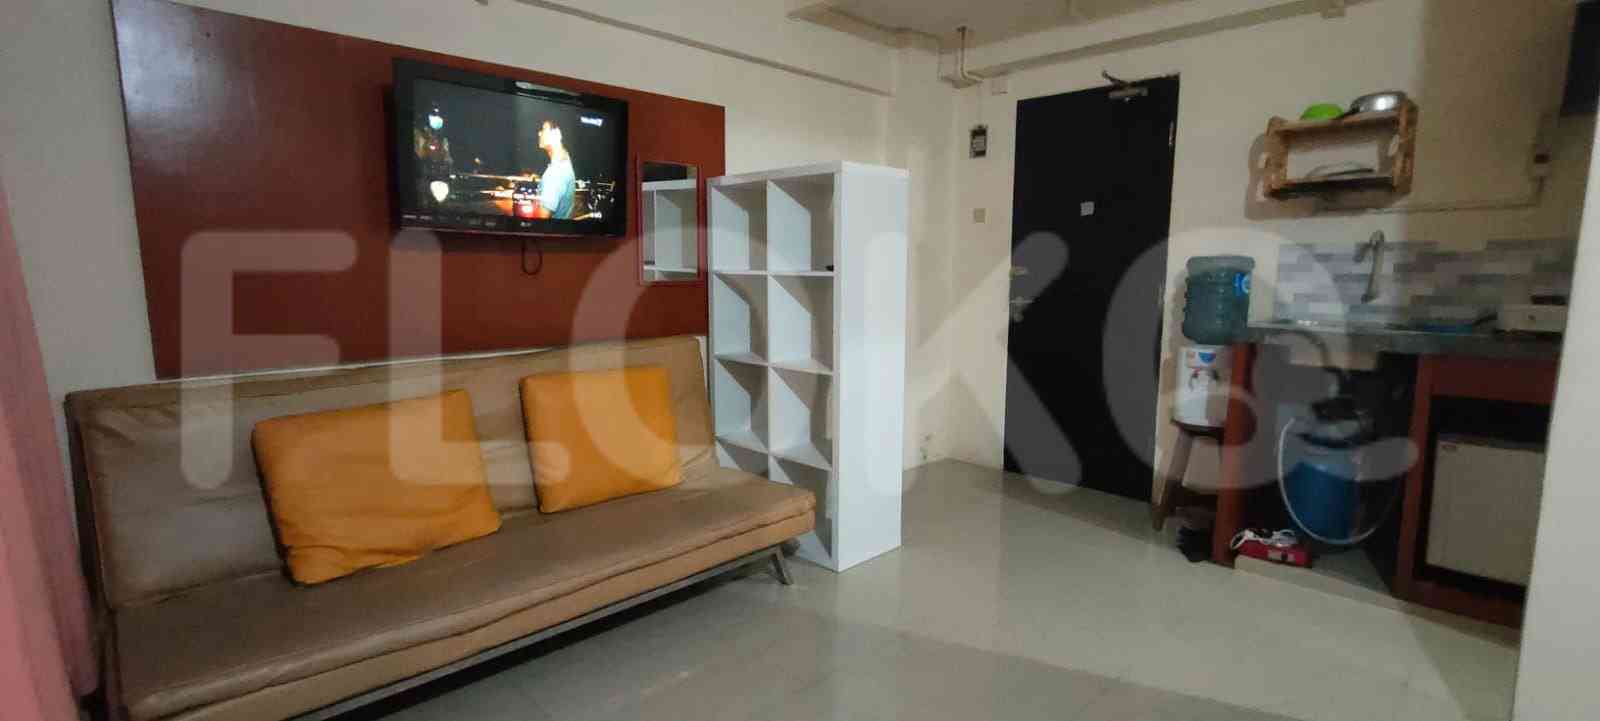 1 Bedroom on 21st Floor for Rent in Sentra Timur Residence - fcab27 1